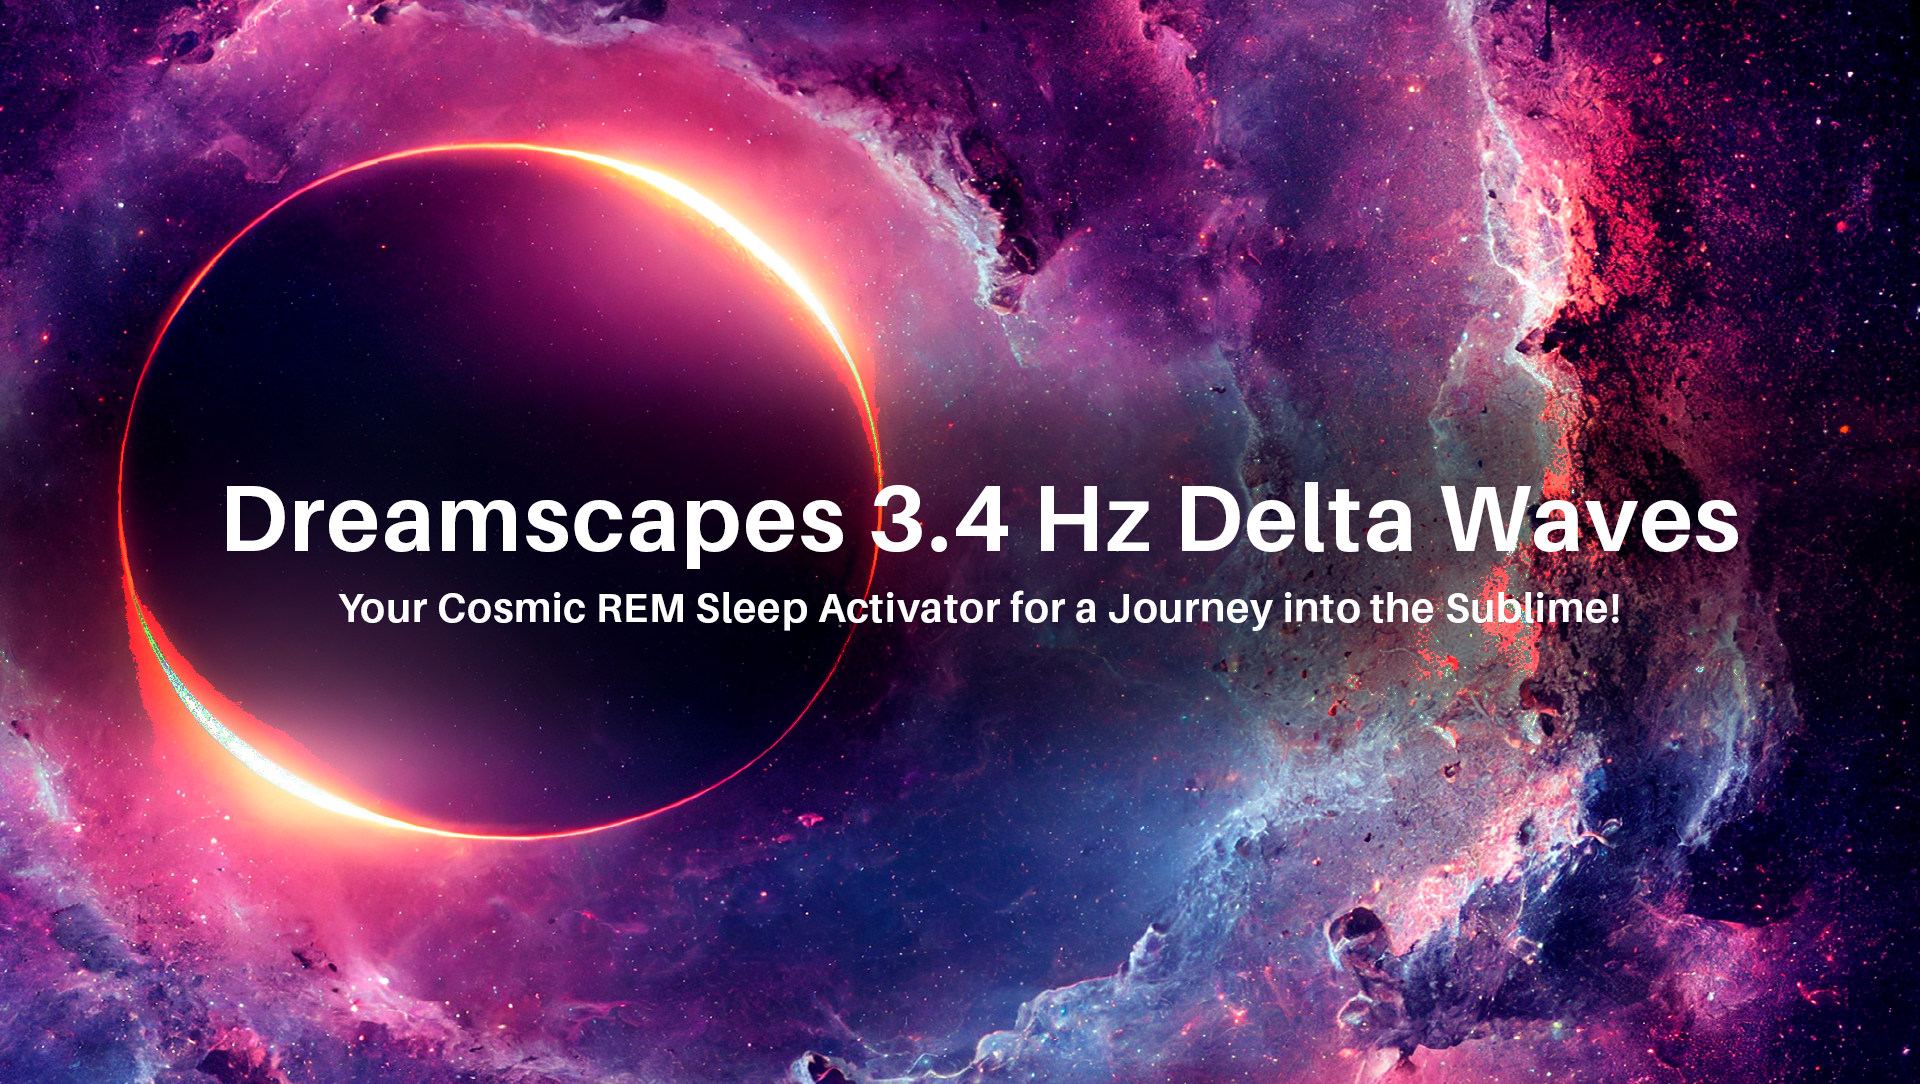 Dreamscapes 3.4 Hz Delta Waves – Your Cosmic REM Sleep Activator for a Journey into the Sublime!